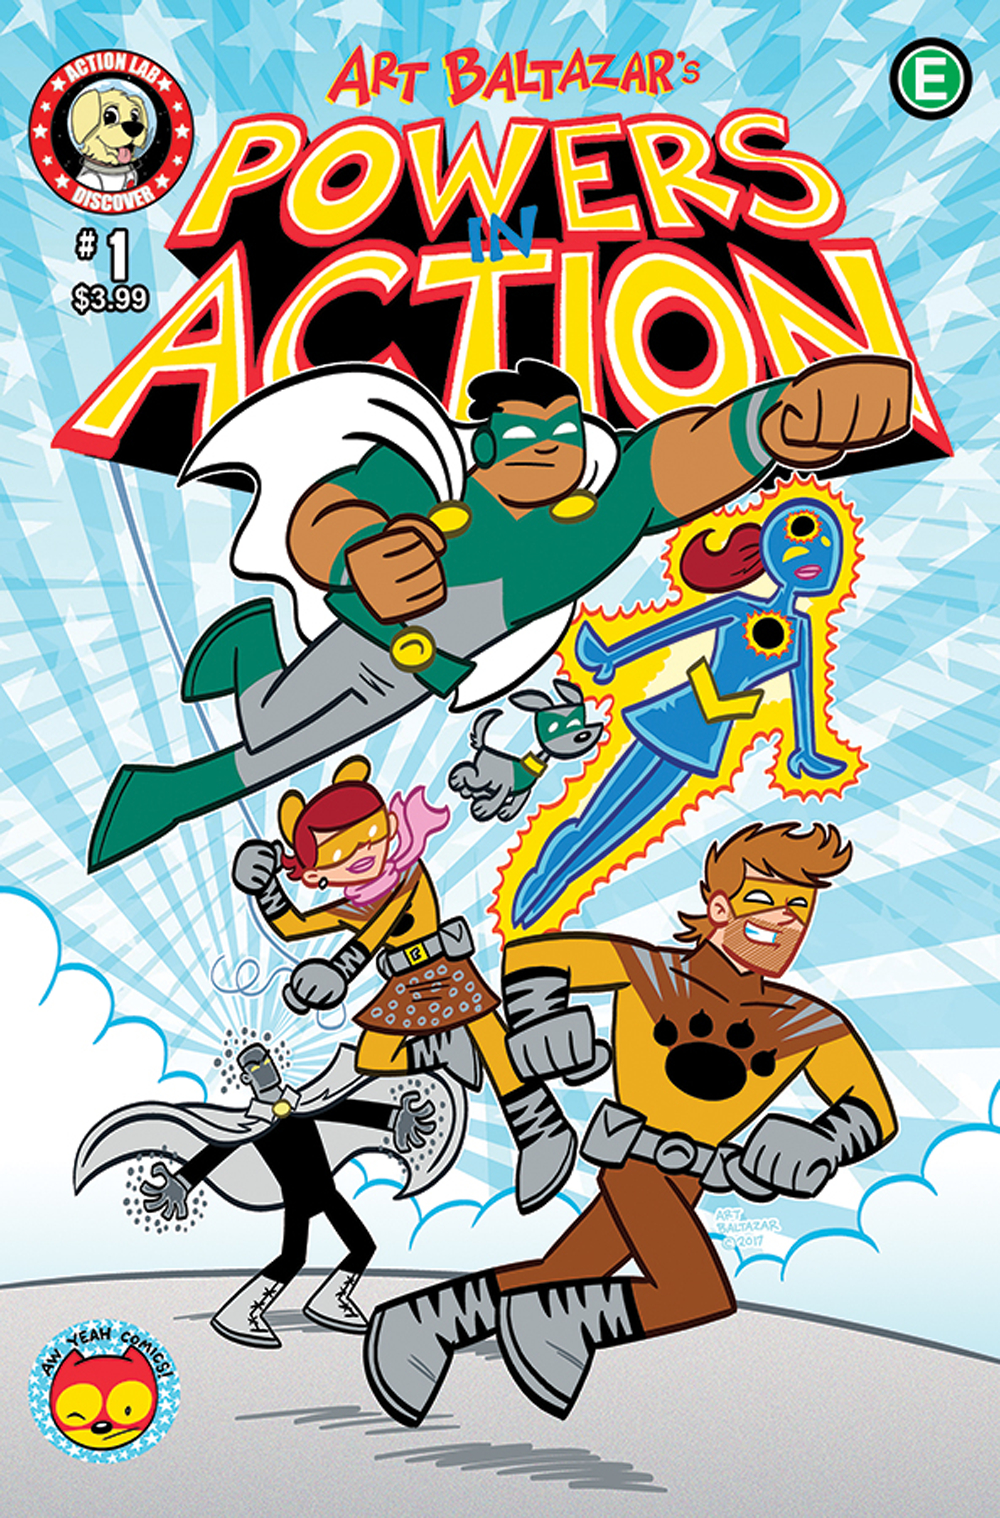 Powers in Action no. 1 (2019 Series)